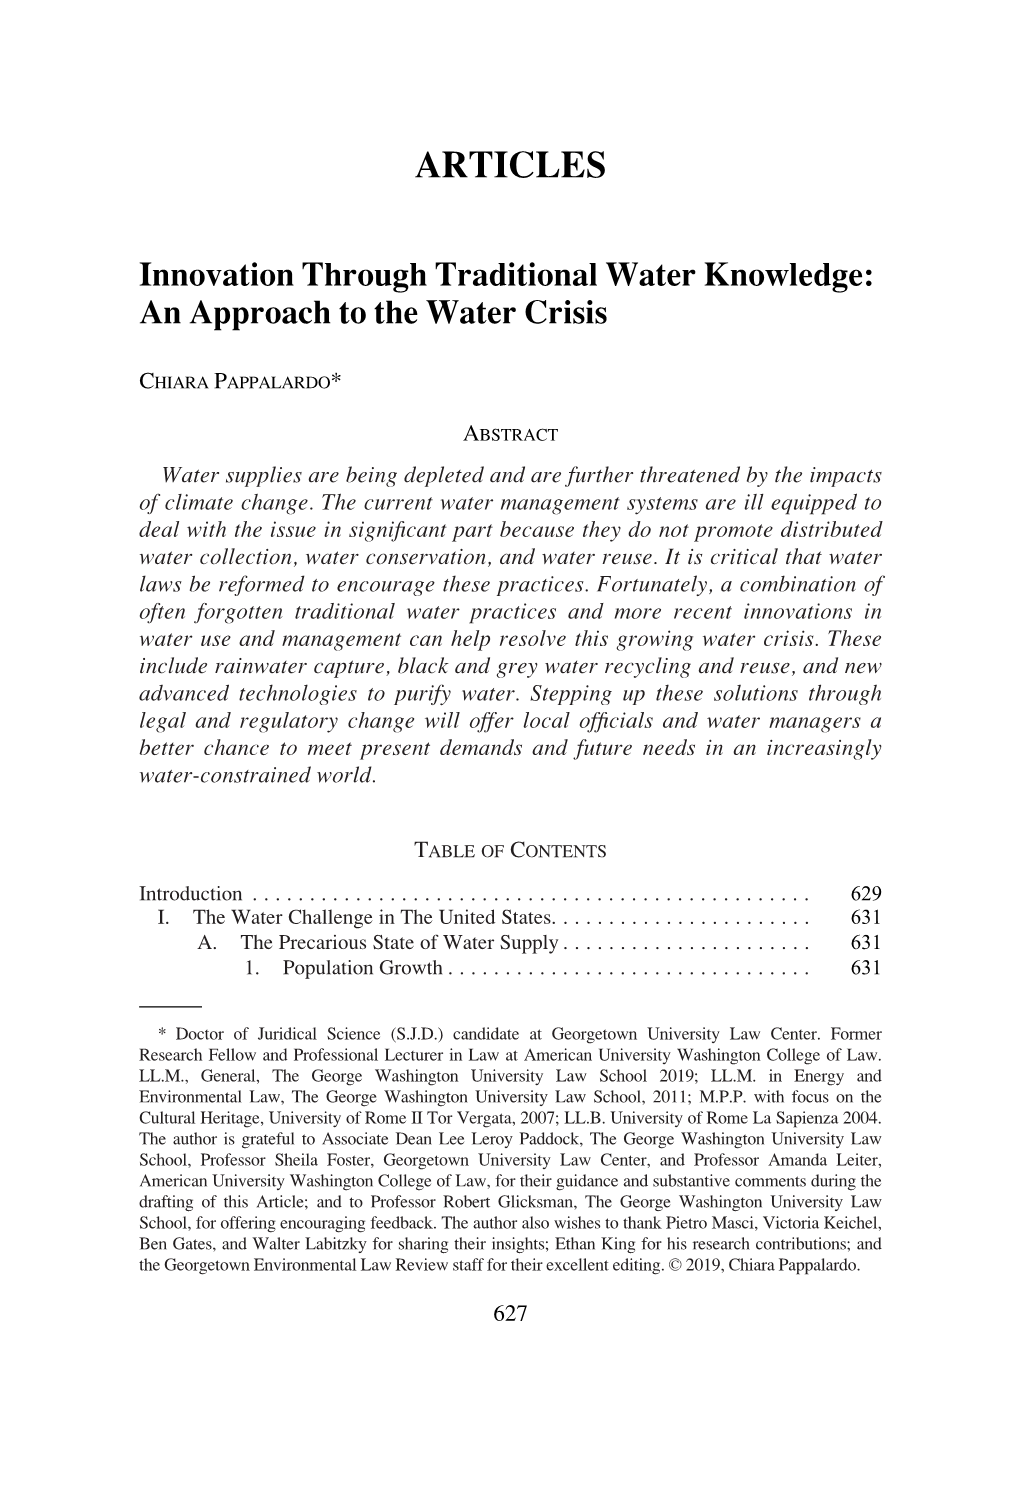 Innovation Through Traditional Water Knowledge: an Approach to the Water Crisis